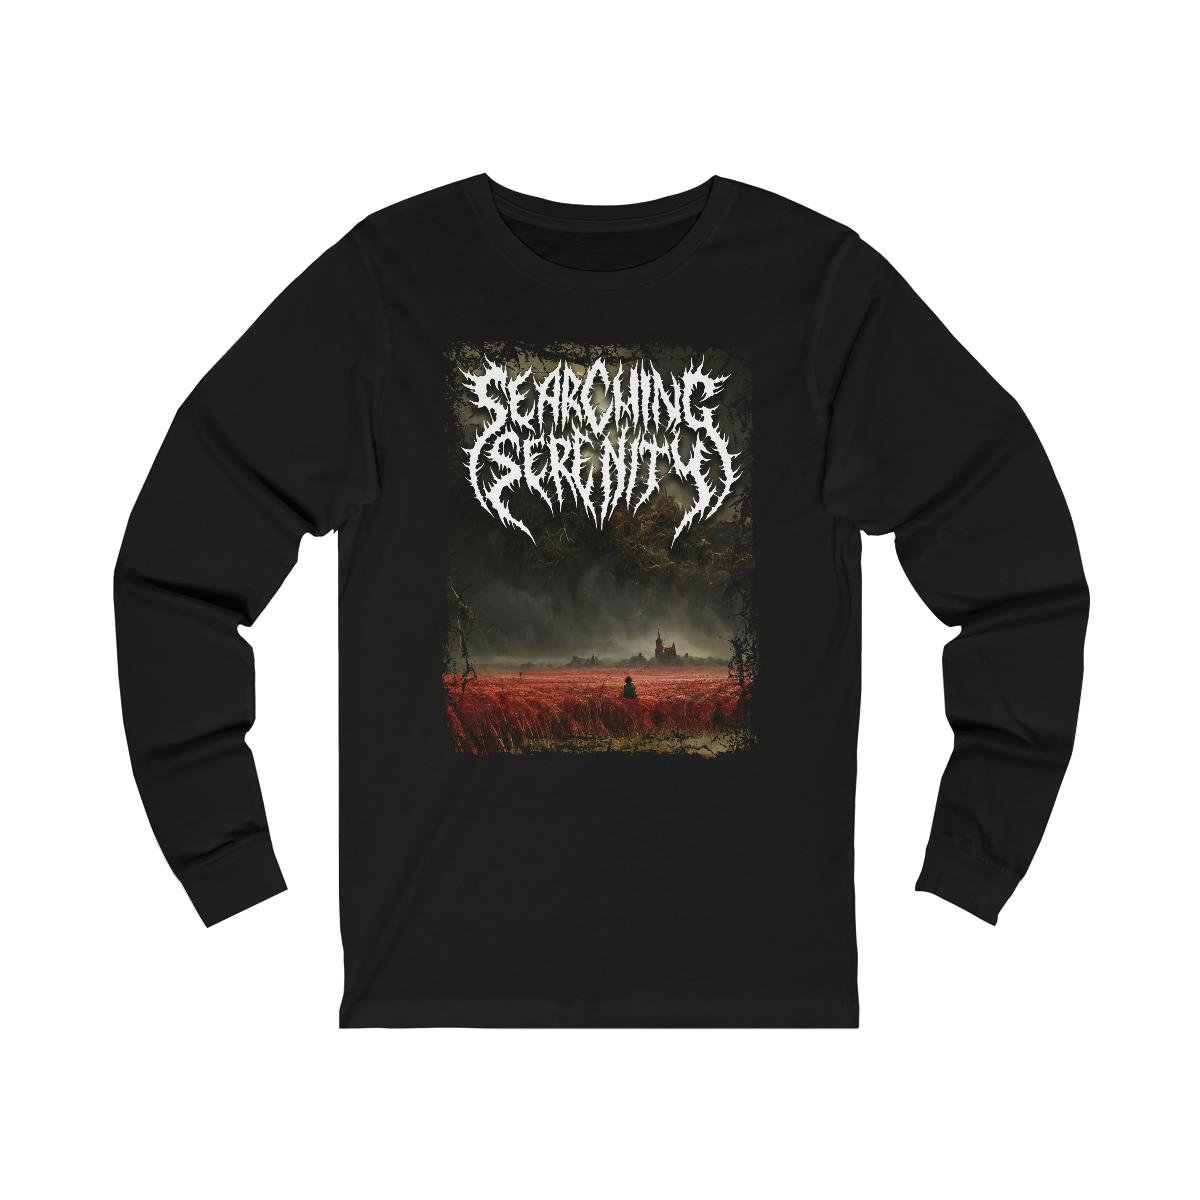 Searching Serenity – The Field Of Blood Long Sleeve Tshirt